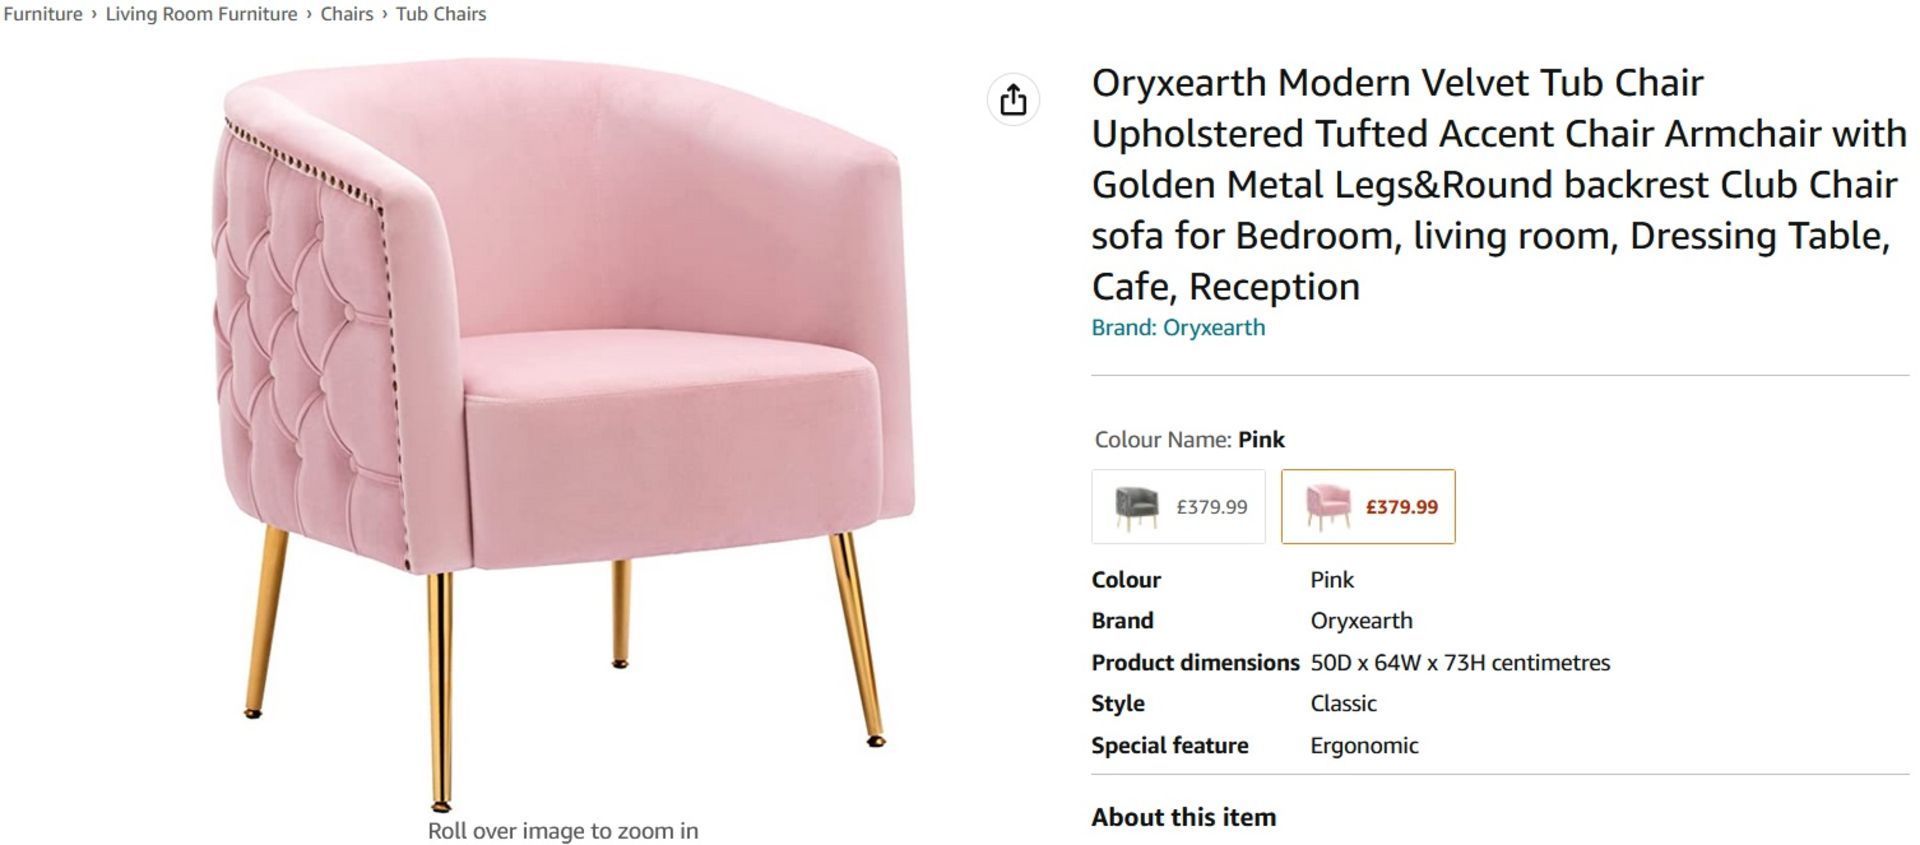 NEW Oryxearth Velvet Barrel Chair Modern Accent Chair with Golden Metal Legs Upholstered Tufted - Image 2 of 4